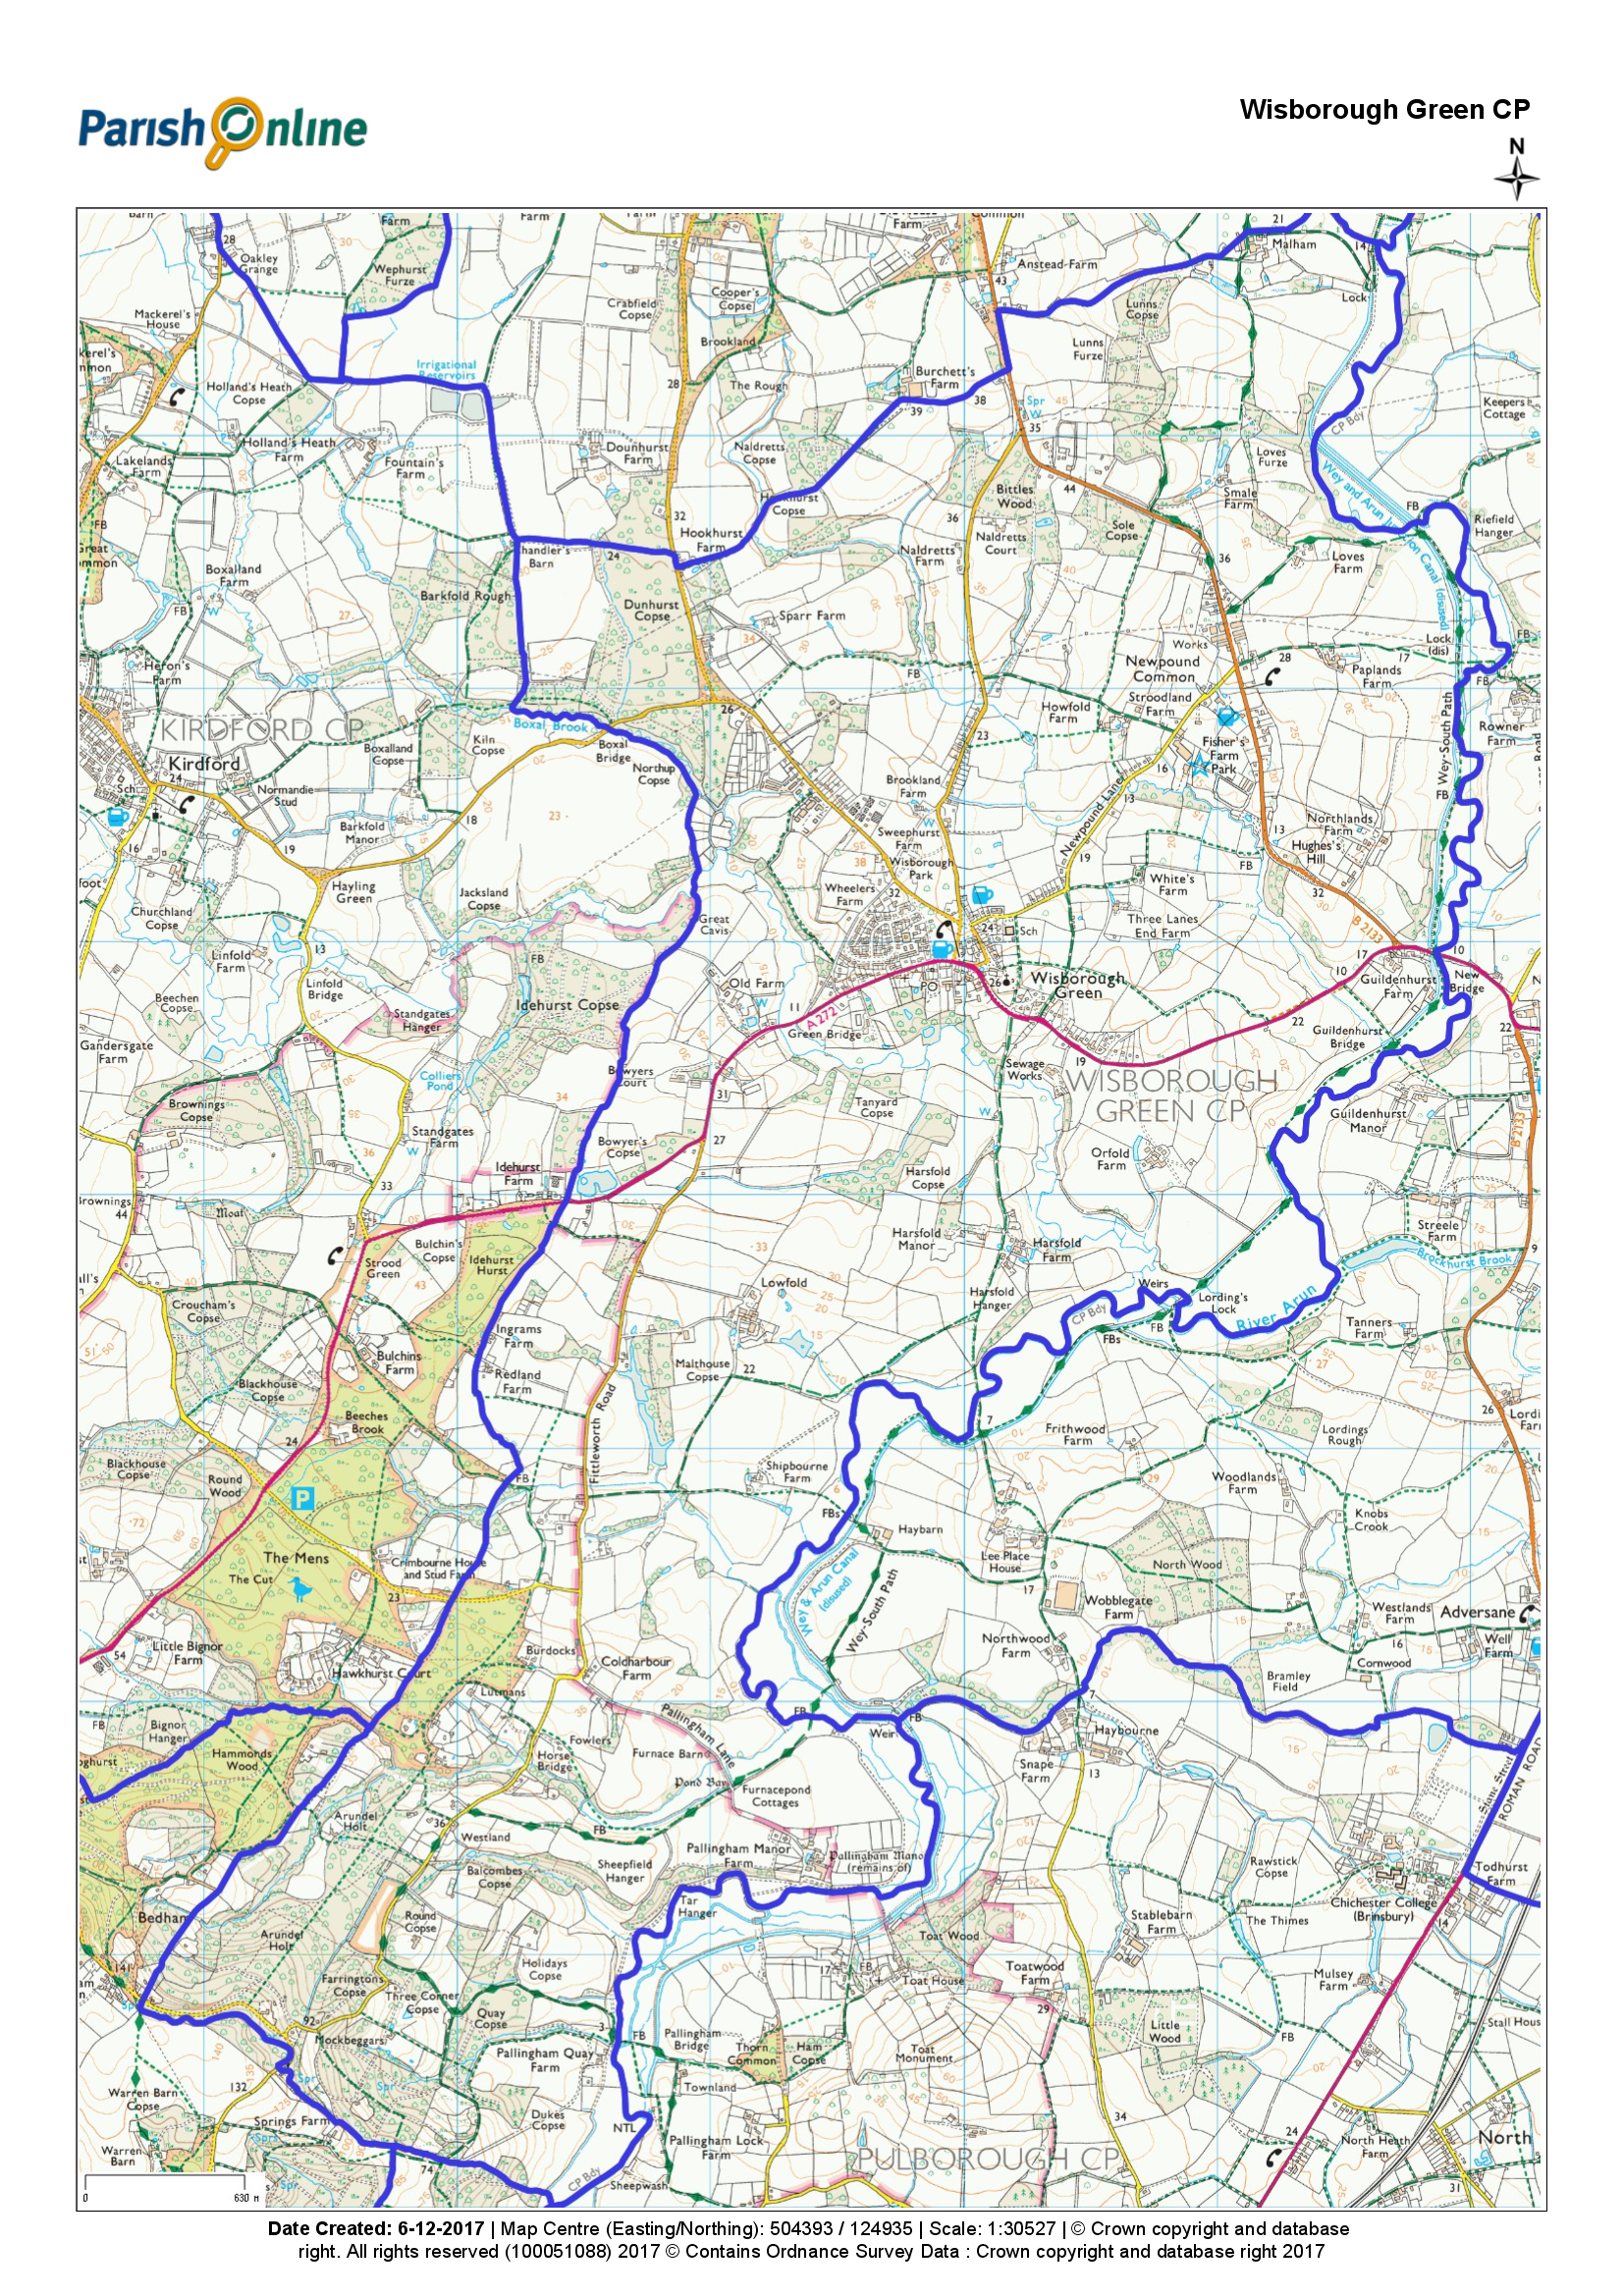 Map showing Wisborough Green Parish outlined in blue